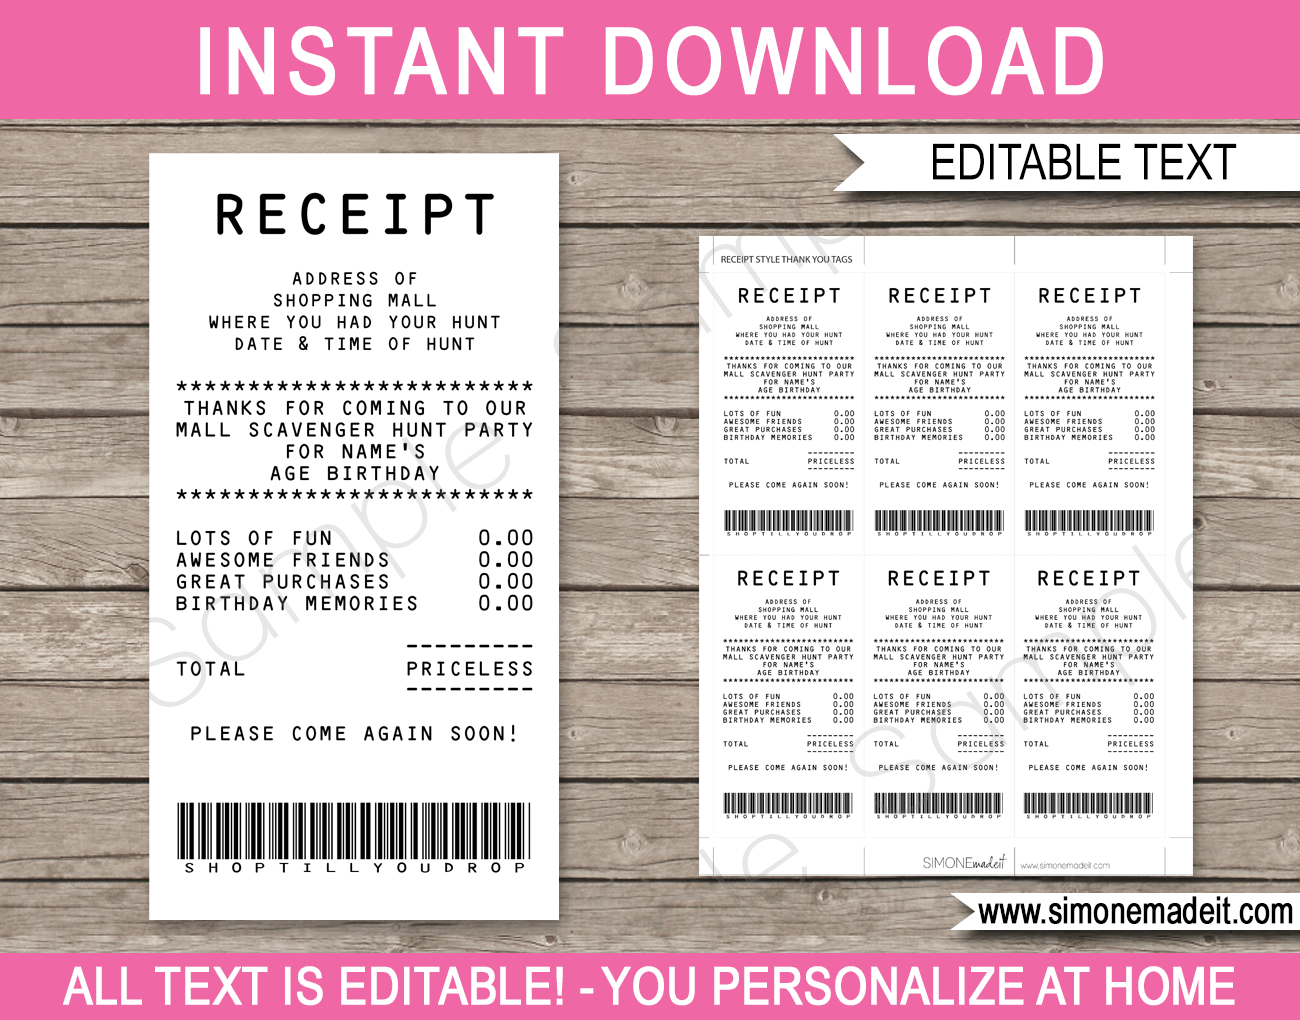 Mall Scavenger Hunt Favor Tags | Receipt | Thank You Tags | Birthday Party | Editable DIY Template | $3.00 INSTANT DOWNLOAD via SIMONEmadeit.com